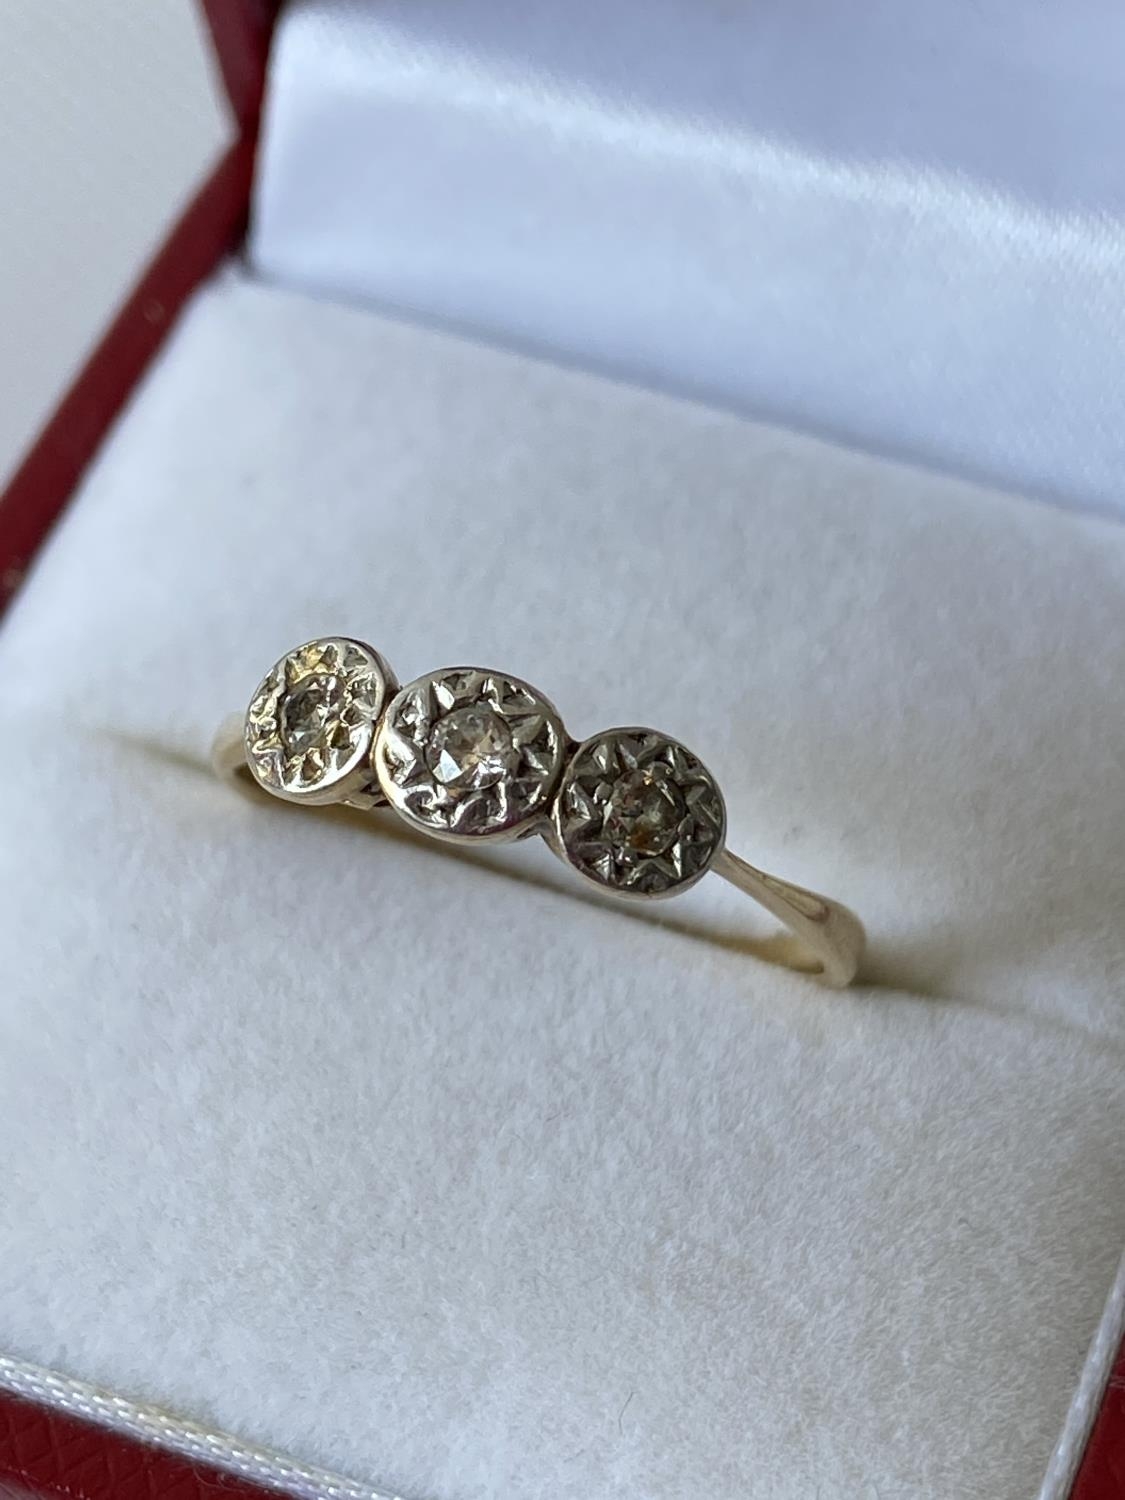 A 9ct gold & 3 diamond stone ring [size M] [1.82g] - Image 2 of 4